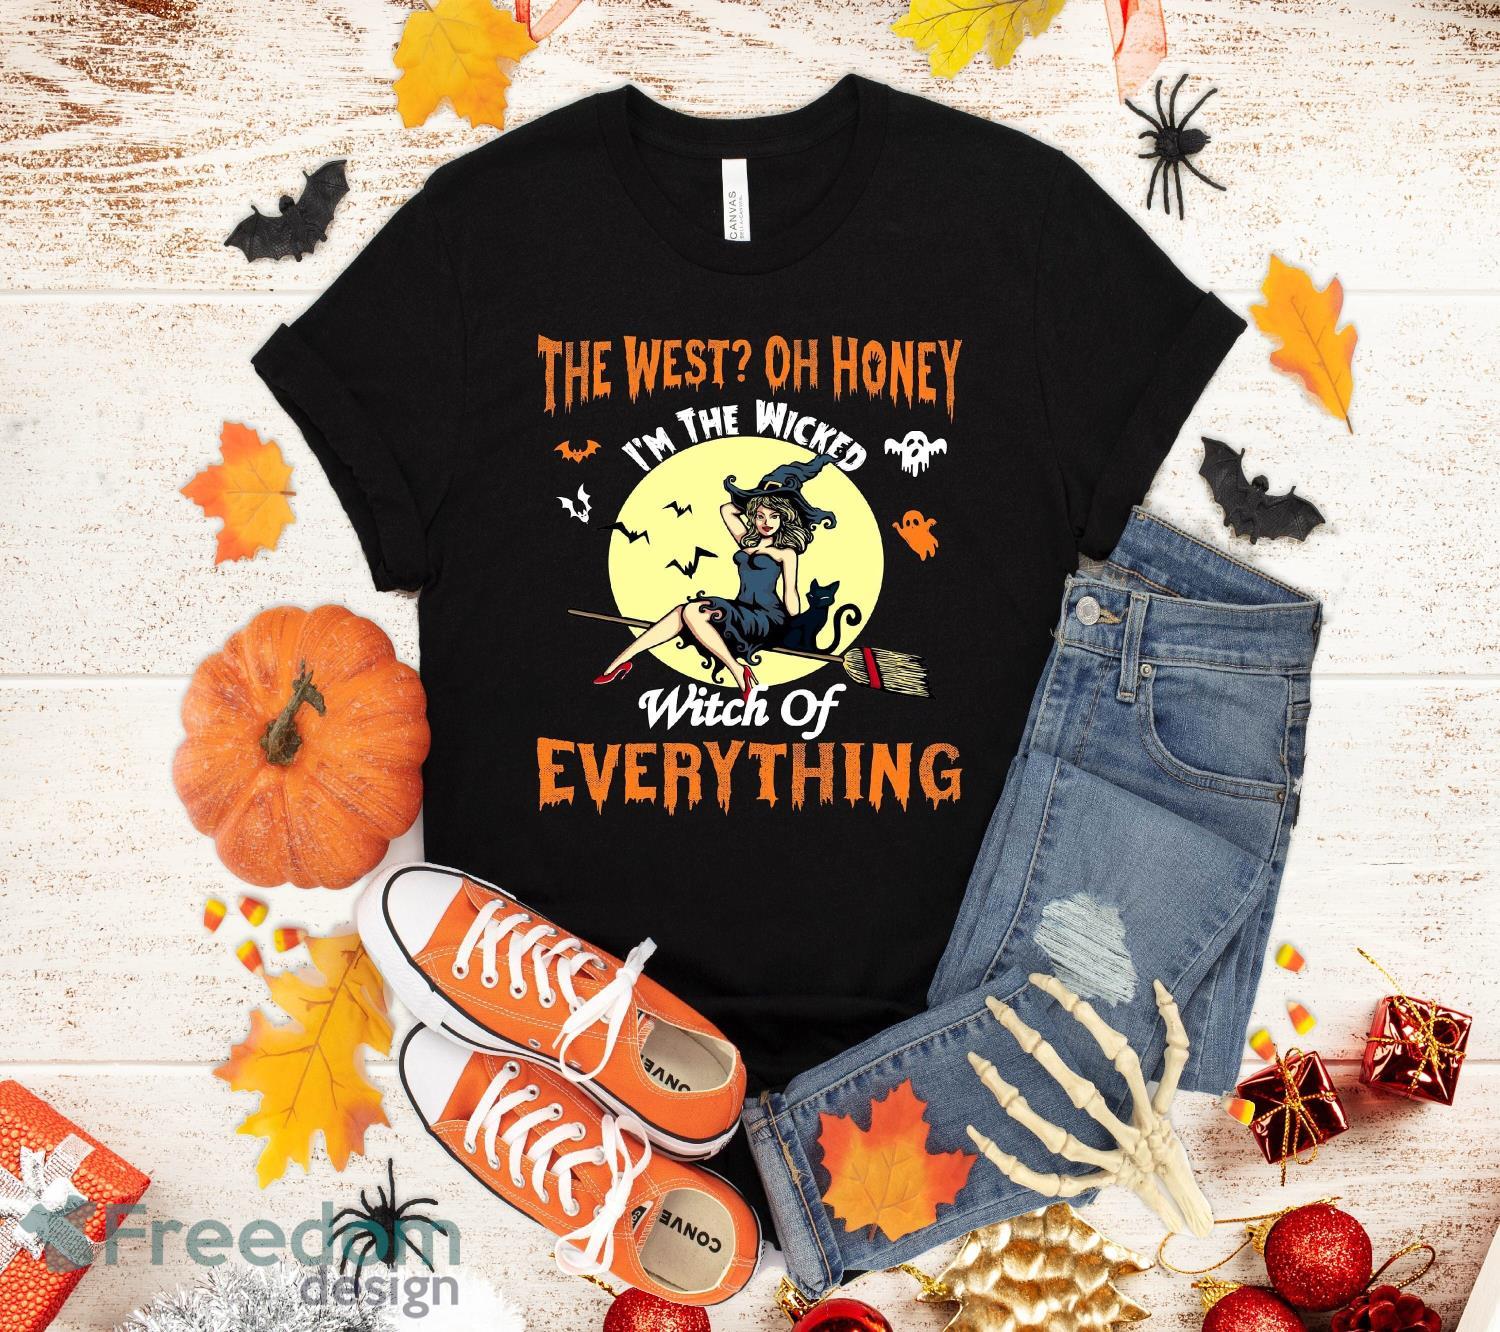 Funny The West Oh Honey I'm The Wicked Witch Of Everything T-Shirt  Halloween Gift Sweatshirt Hoodie - Freedomdesign